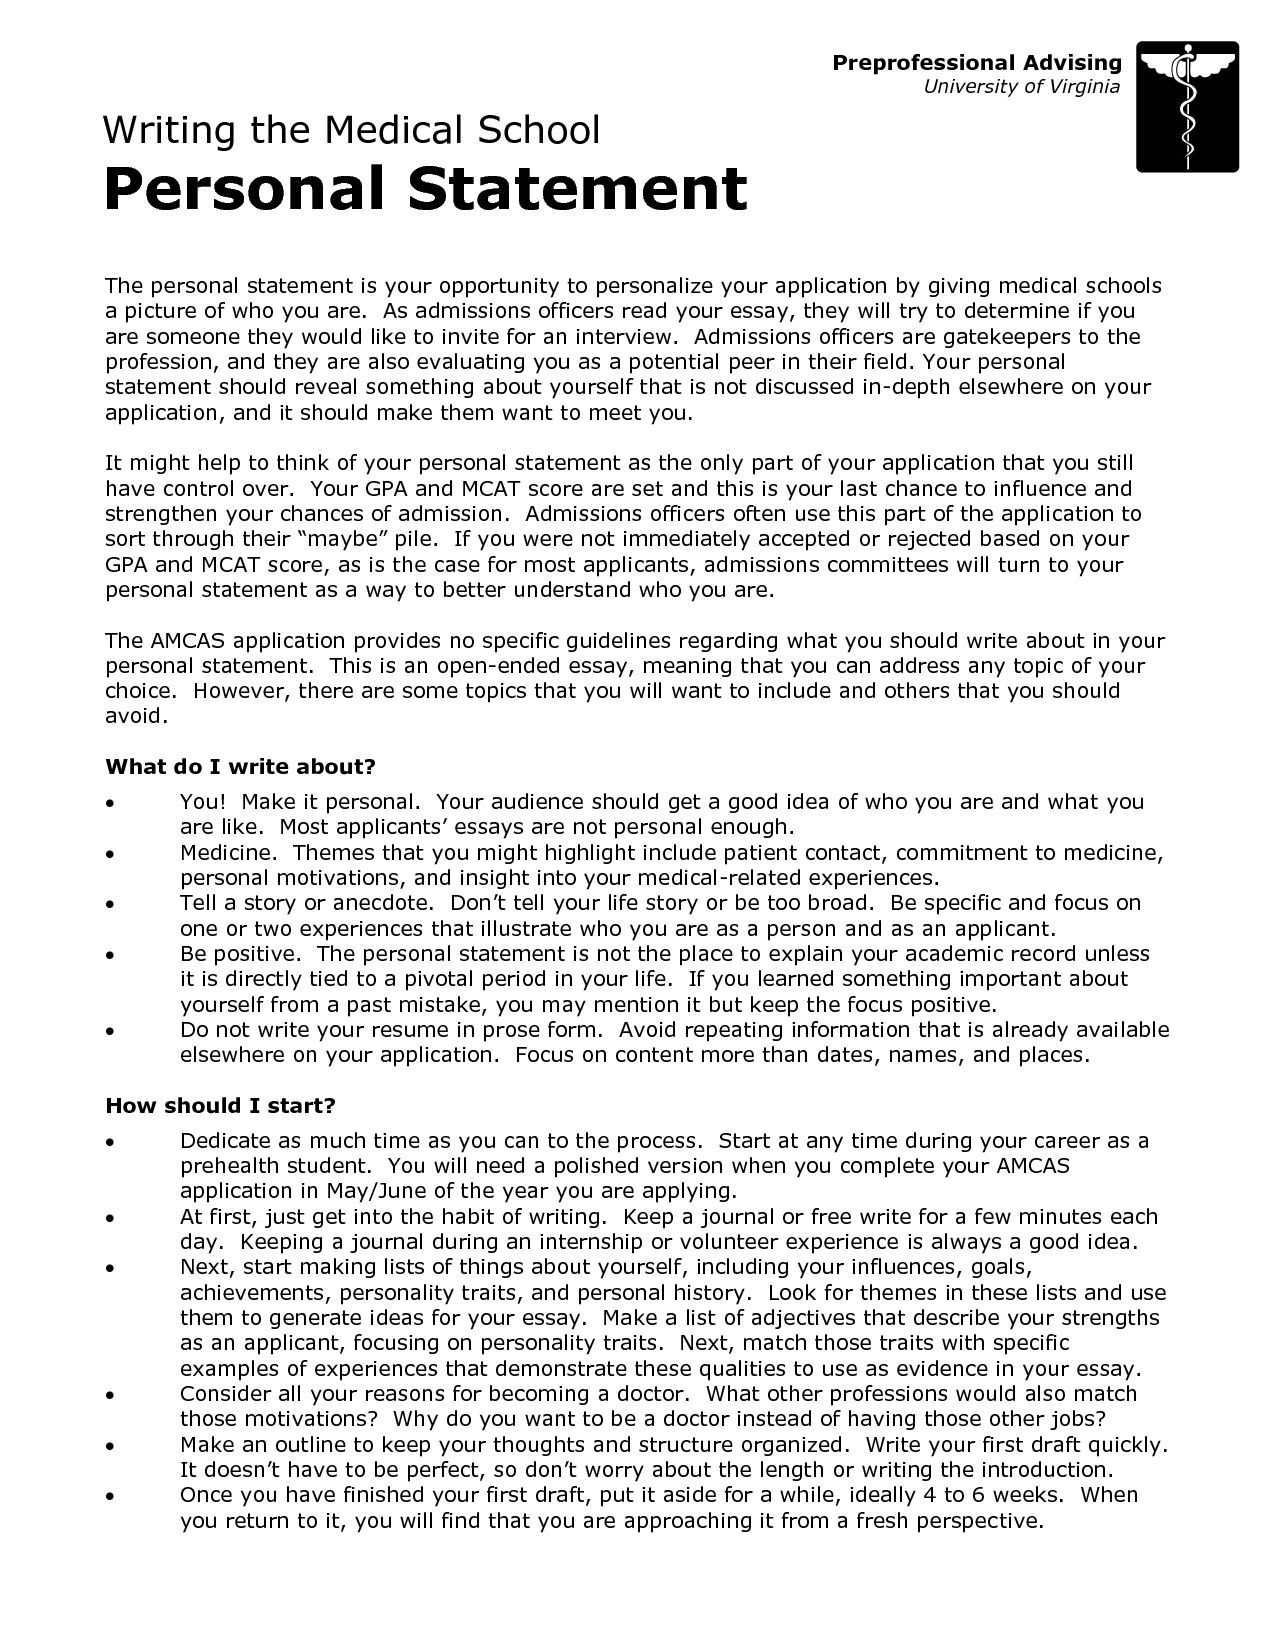 Personal statement for university